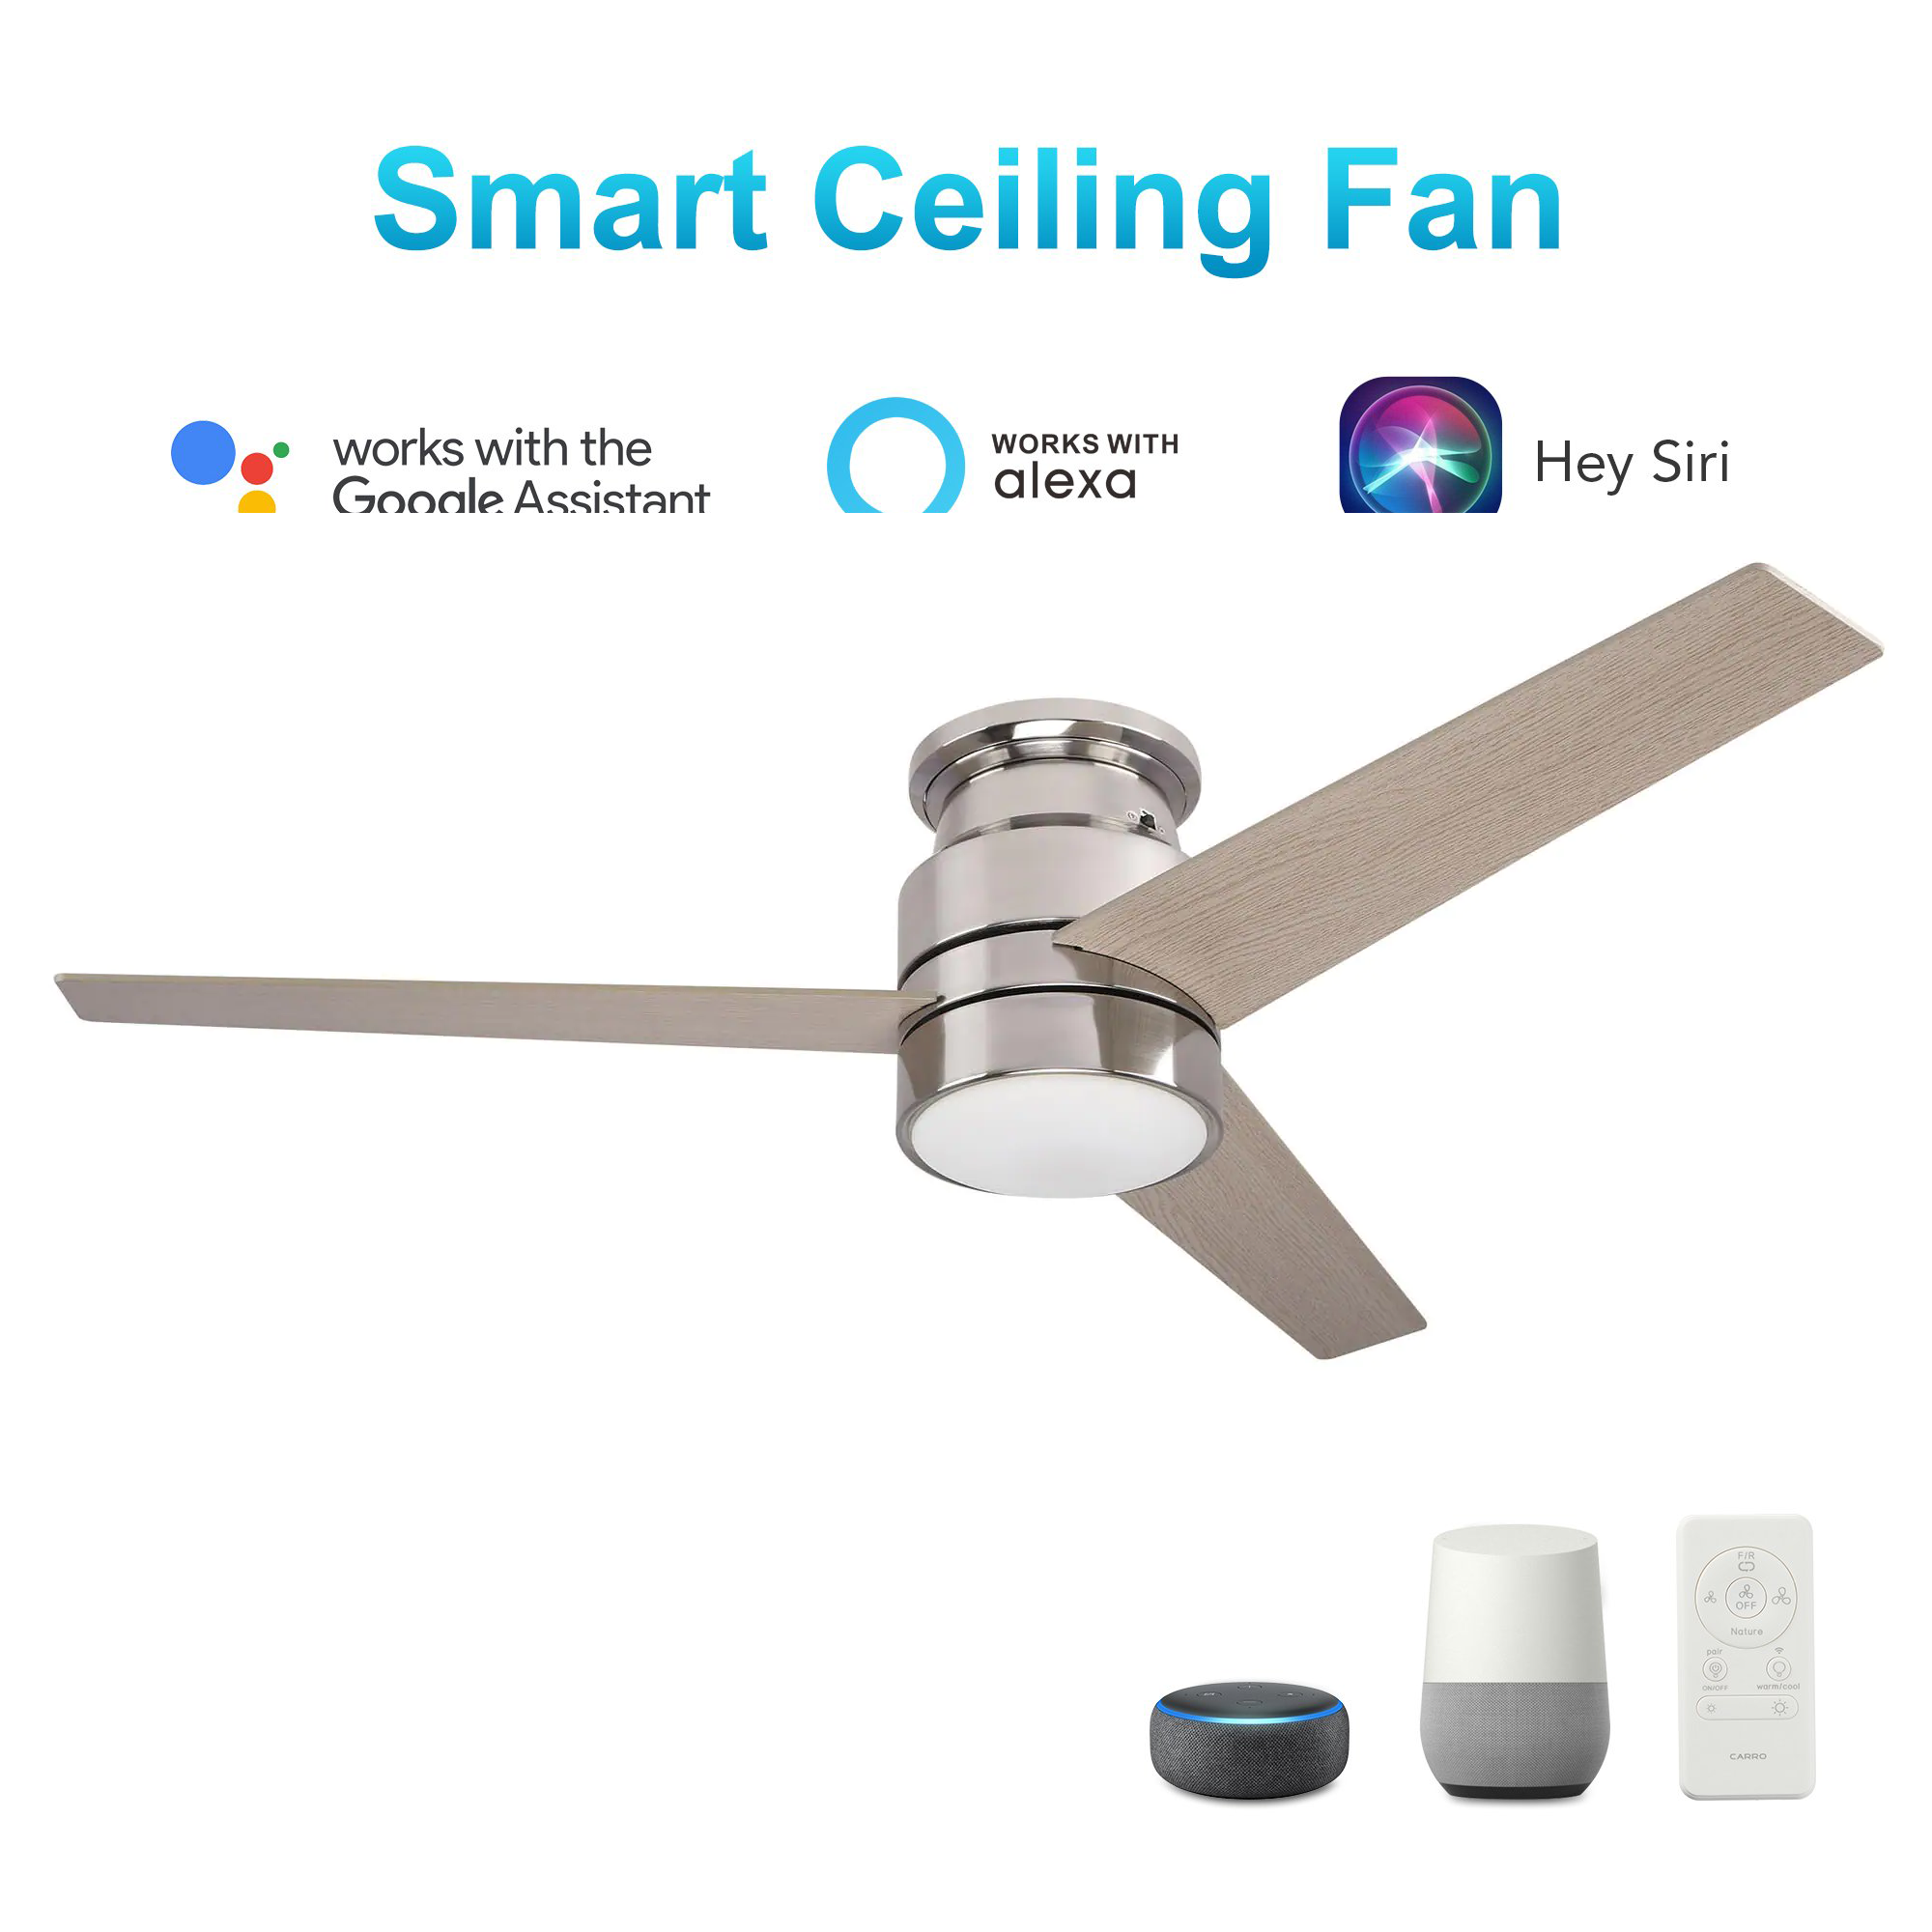 Ranger 52" In. Silver/Wood 3 Blade Smart Ceiling Fan with LED Light Kit Works with Wall control, Wi-Fi apps and Voice control via Google Assistant/Alexa/Siri